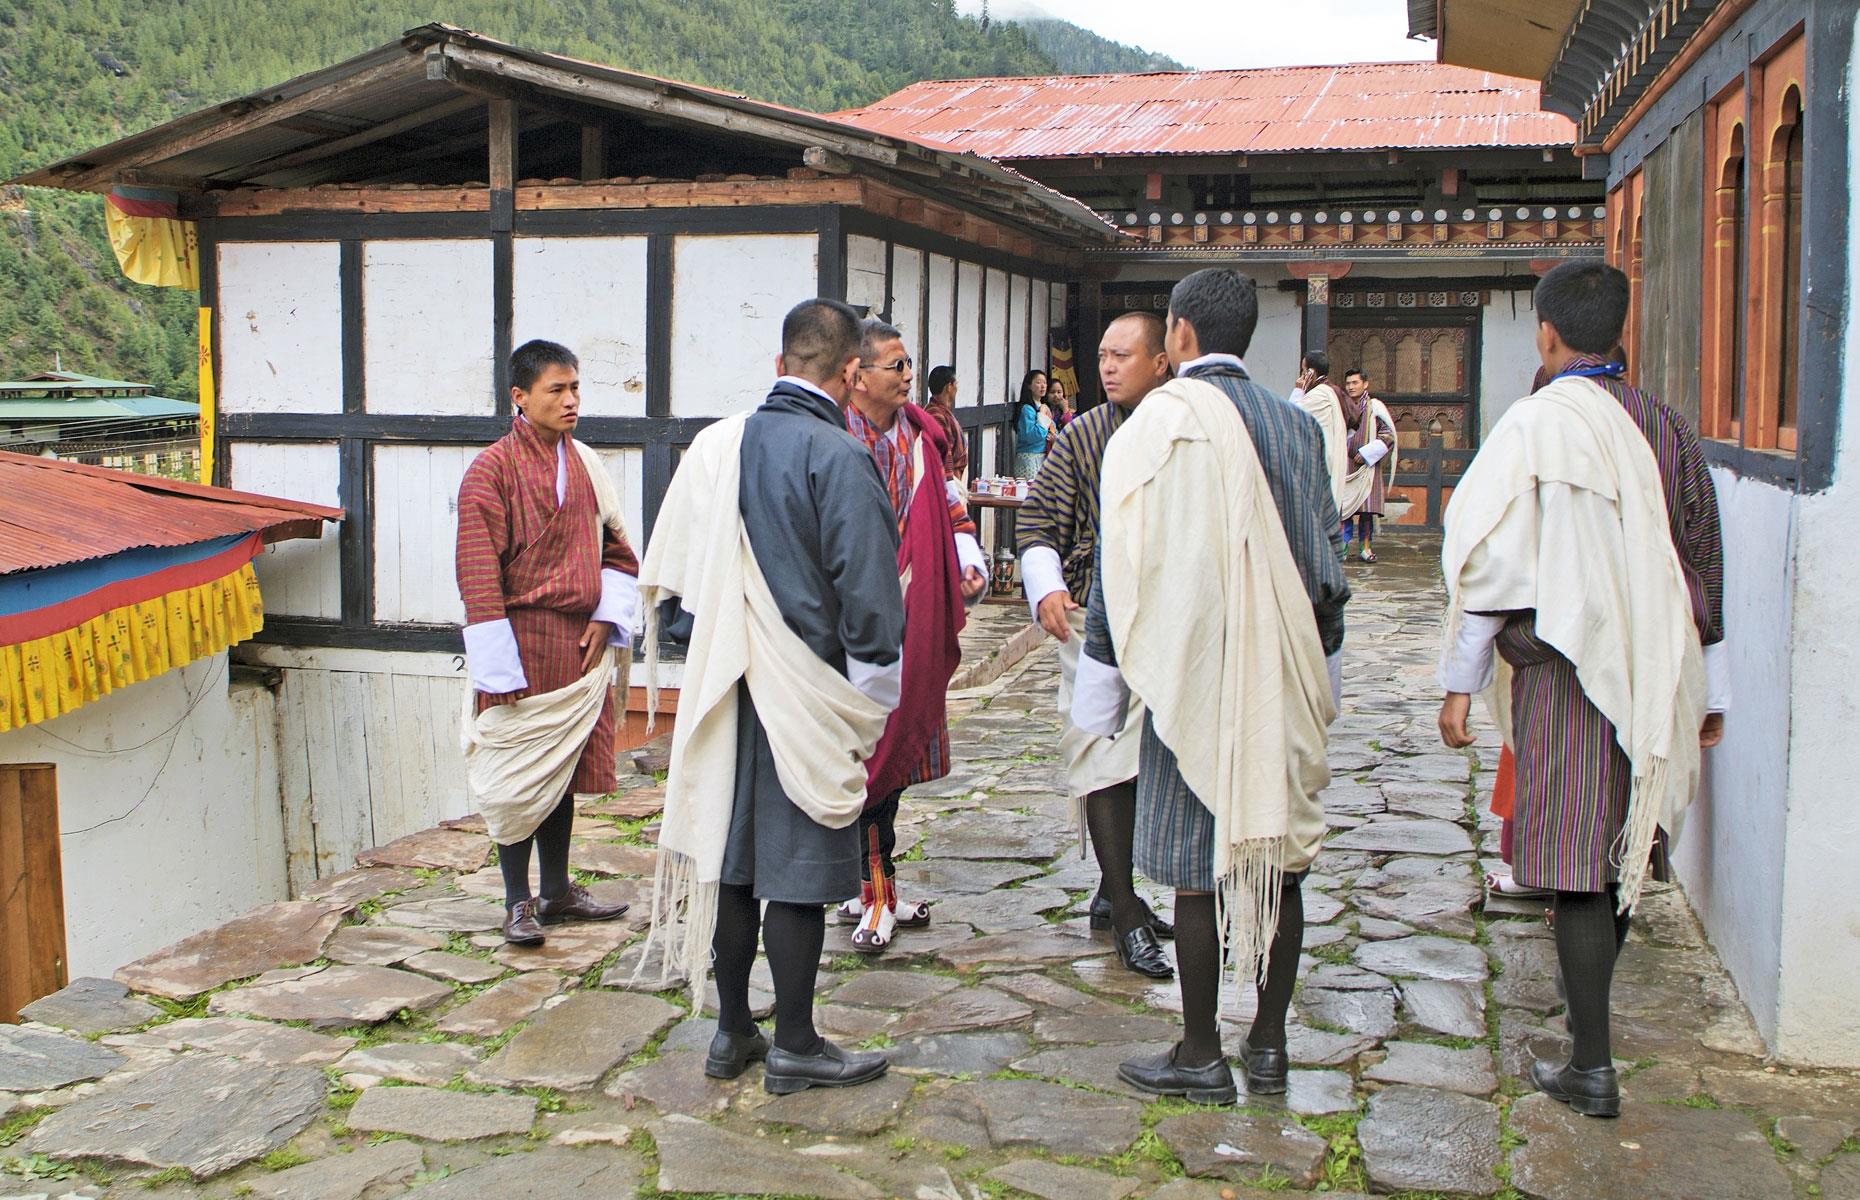 Lowest-paying country for civil servants: Bhutan – $804 (£617) average salary